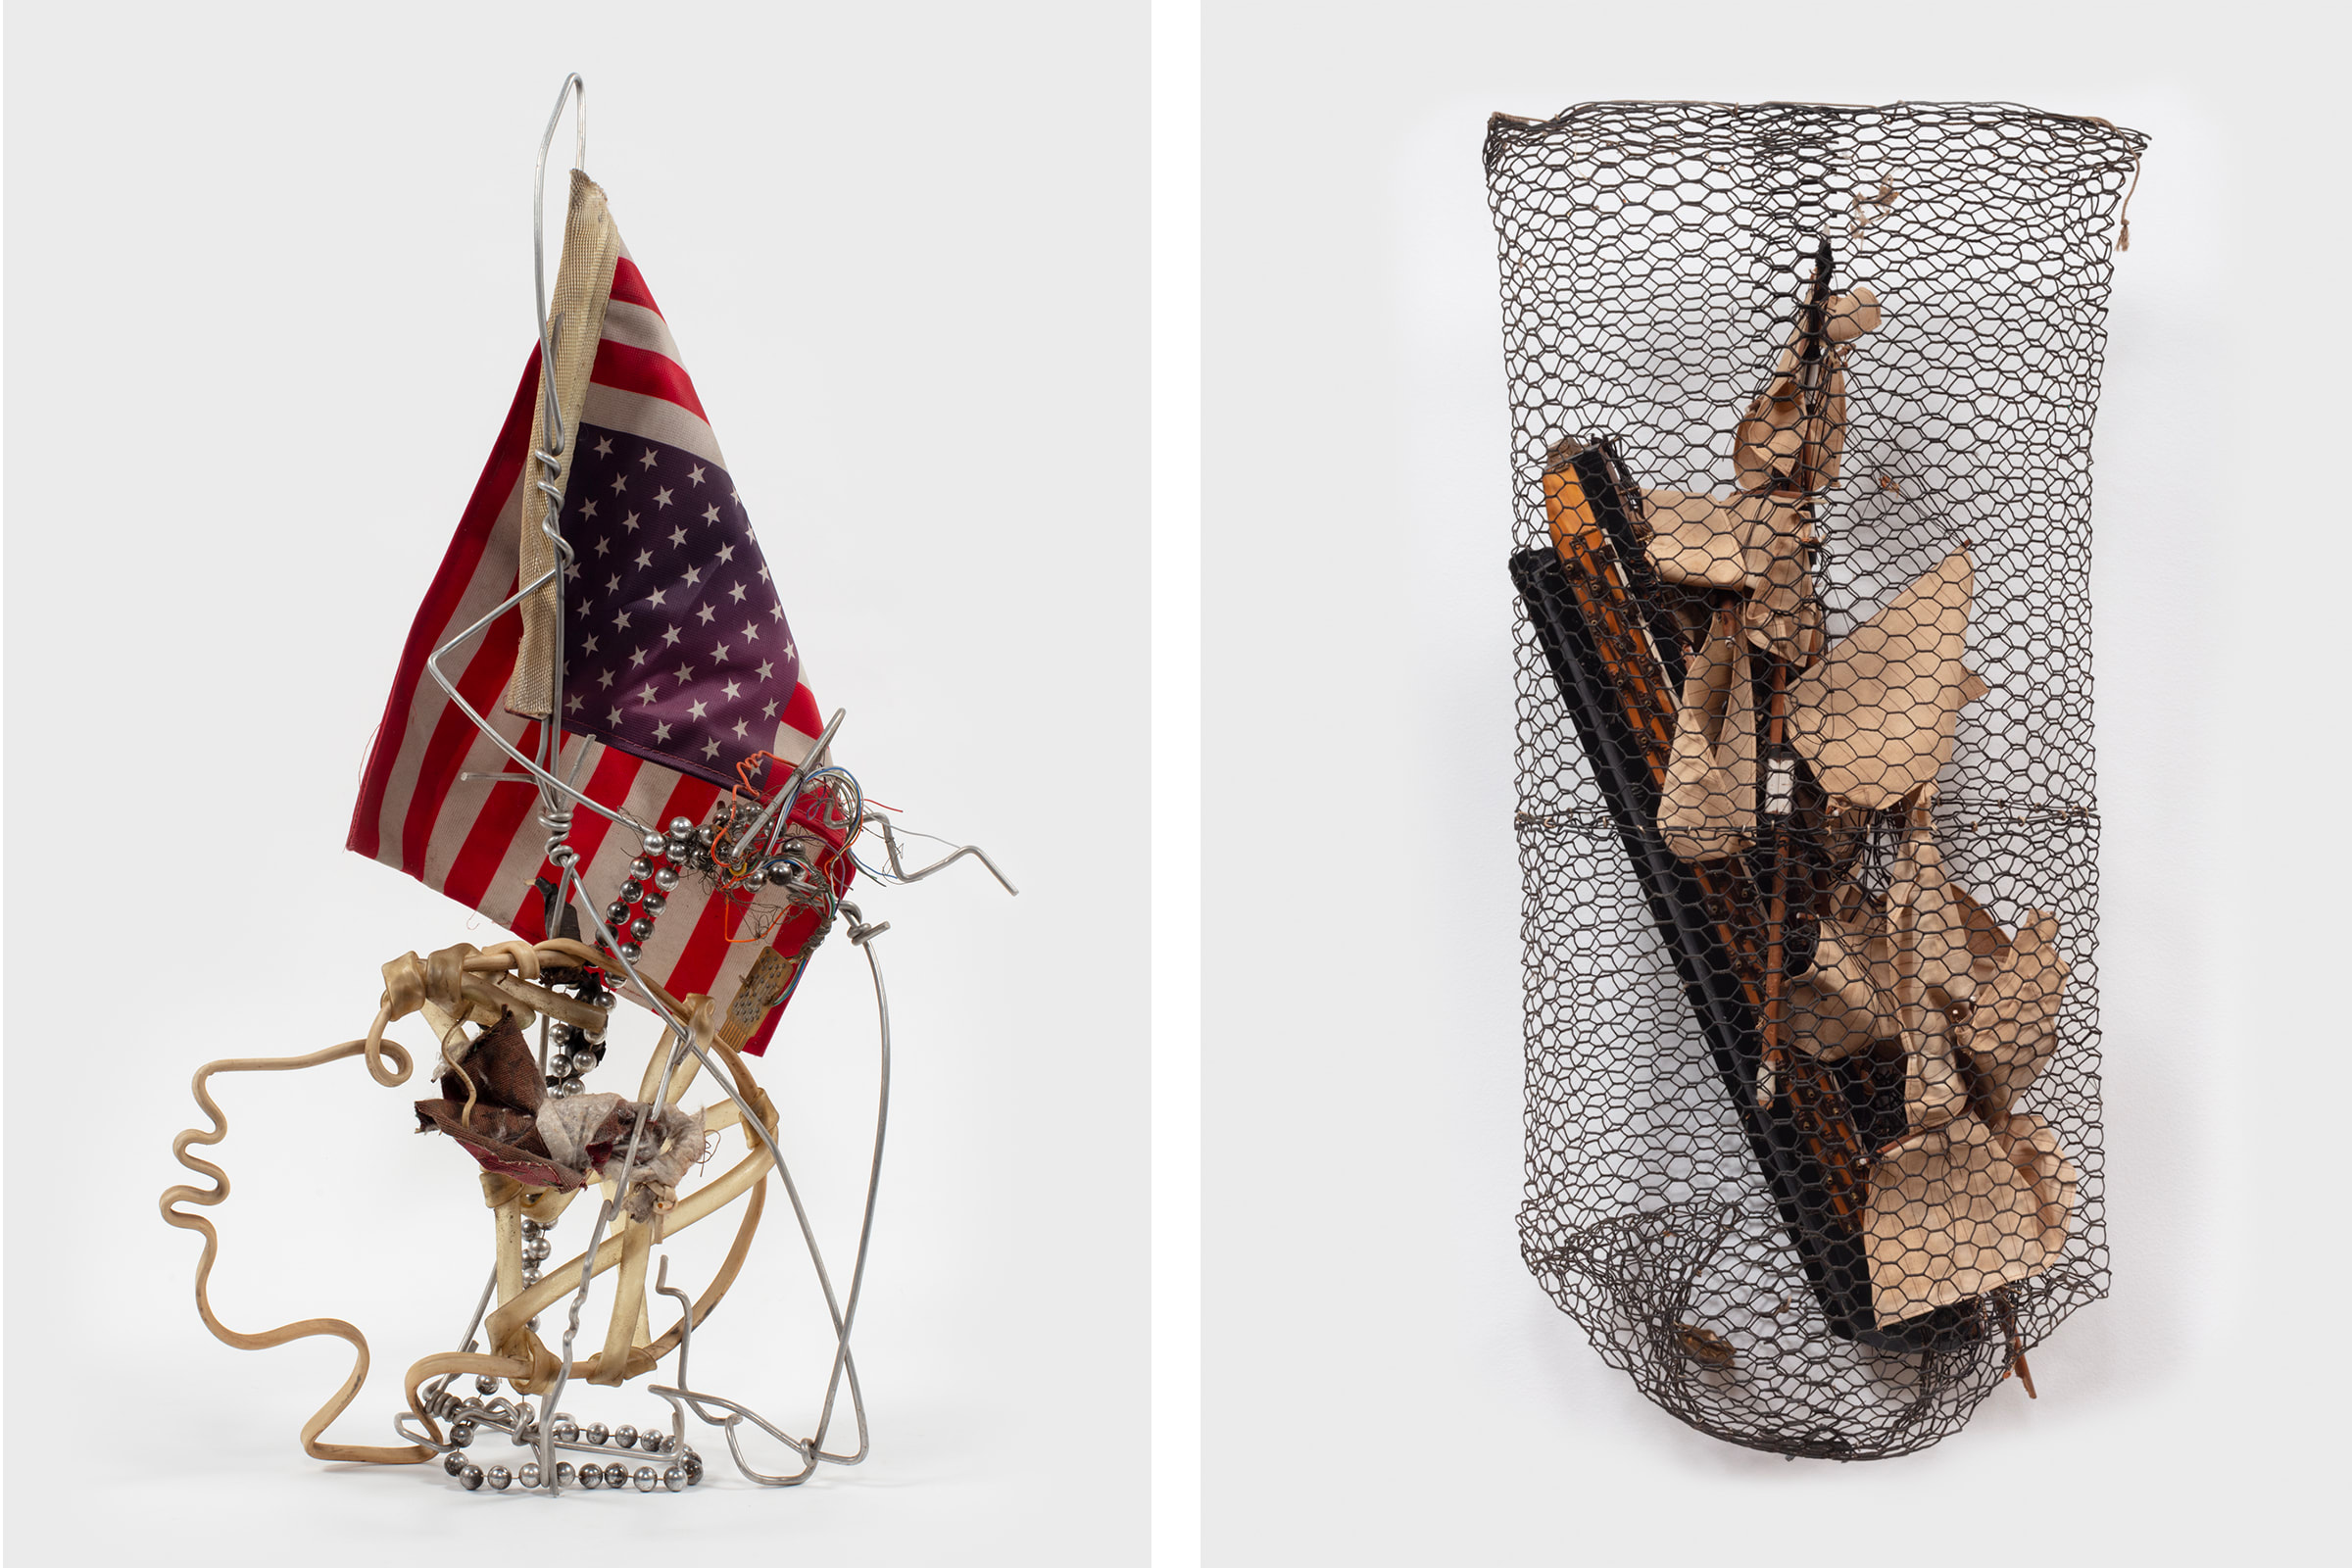 Left: Space Babies Will See the Flag Upside Down, 2008. Josh Schaedel. Right: Trapped (for Ronald Lockett), 2019. Photographs by Josh Schaedel. © Lonnie Holley / Artists Rights Society (ARS), New York. Courtesy of the artist and Blum & Poe.